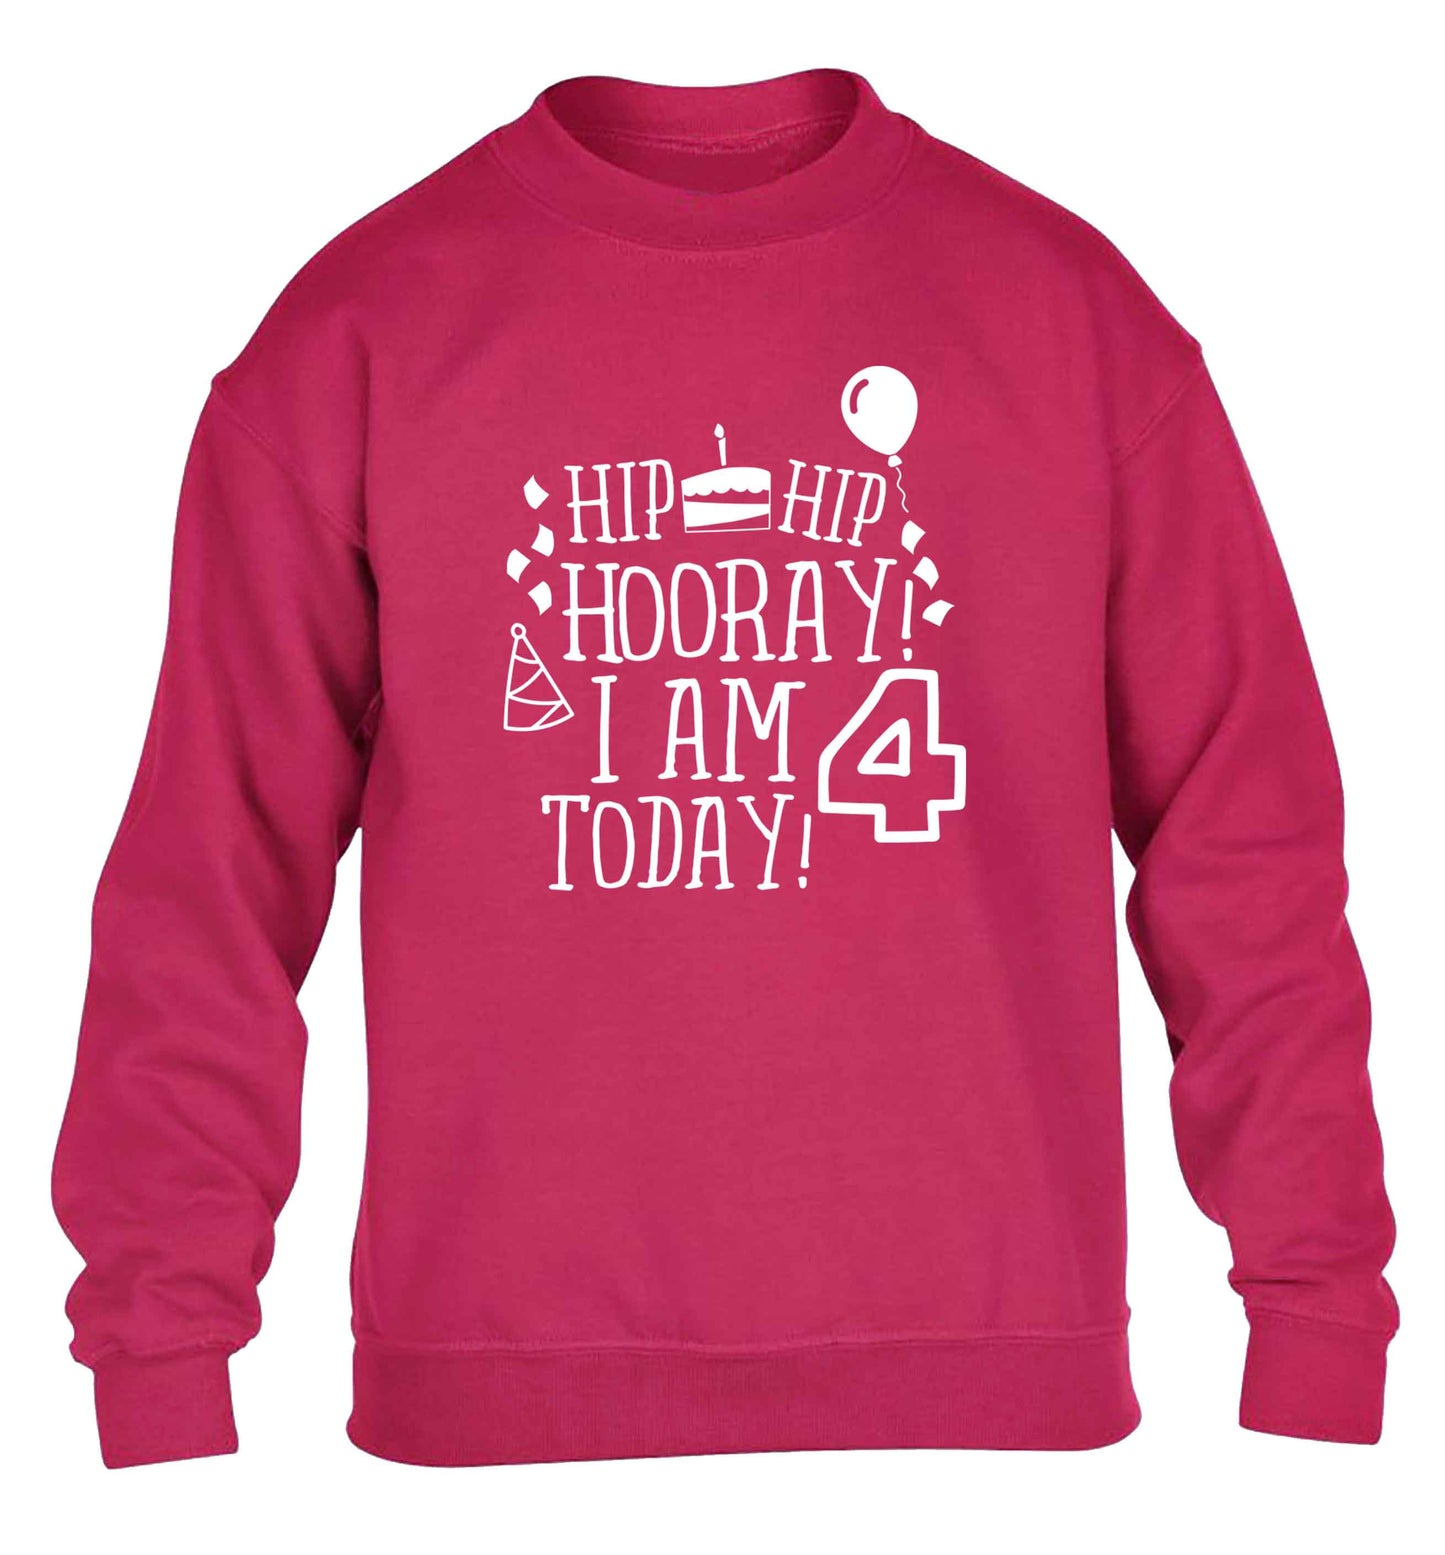 Hip hip hooray I am four today! children's pink sweater 12-13 Years